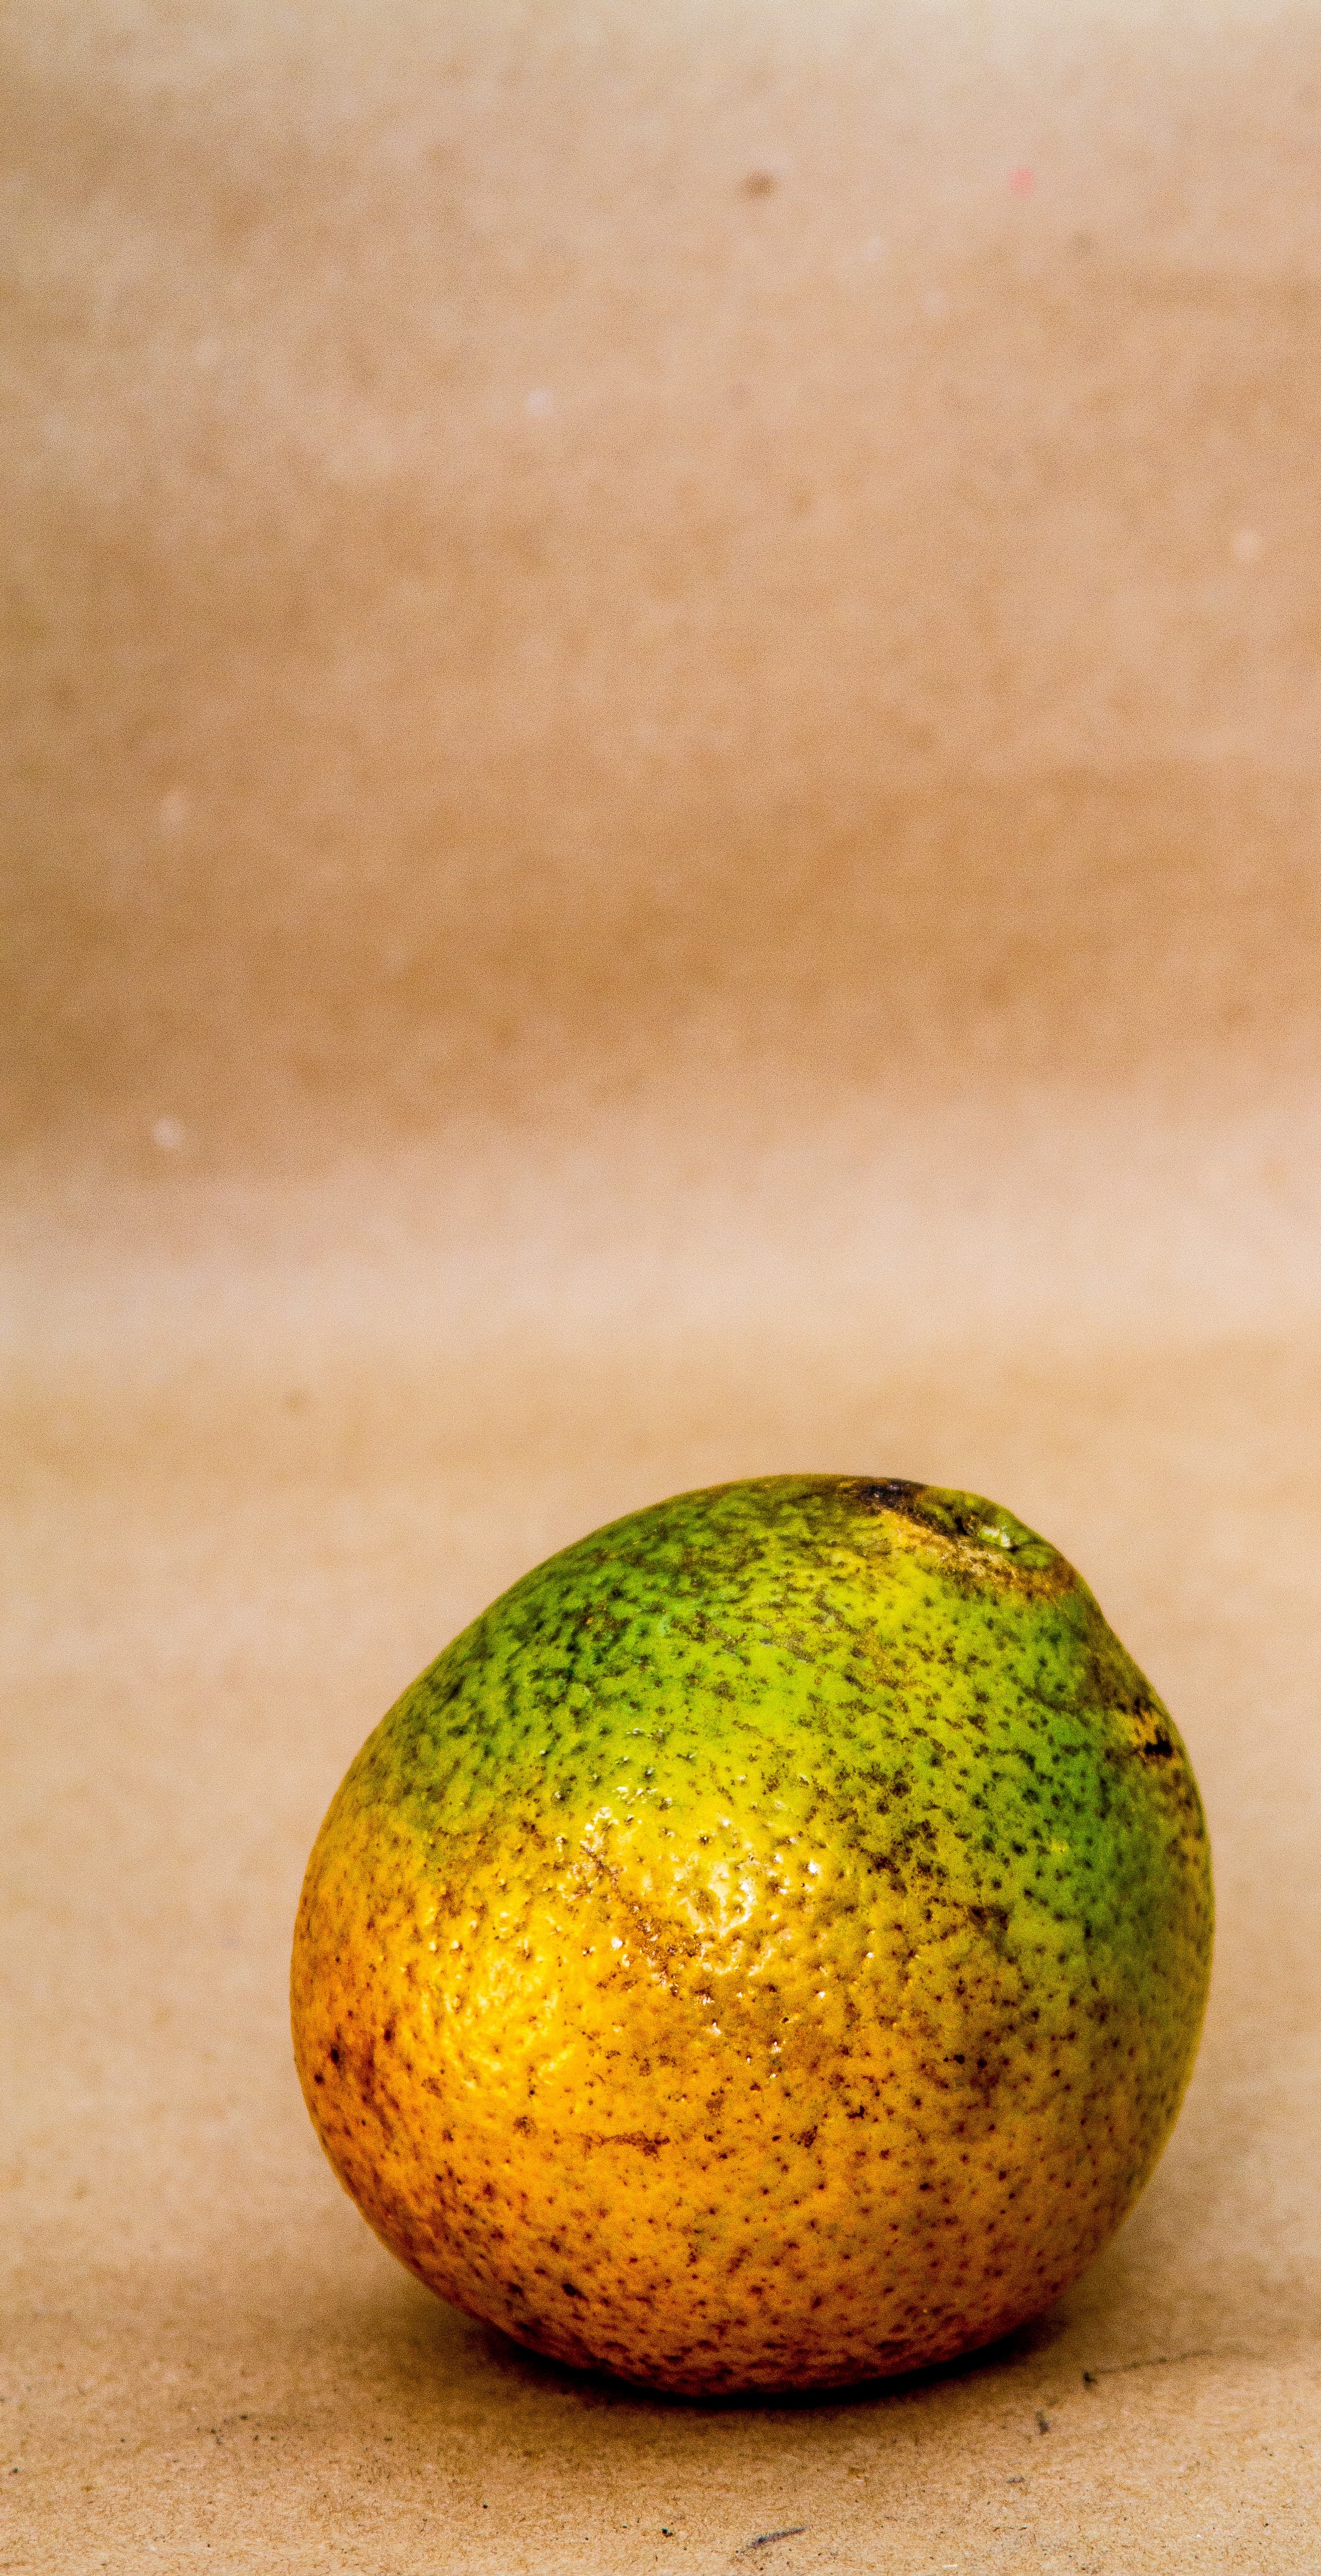 green and yellow round citrus fruit